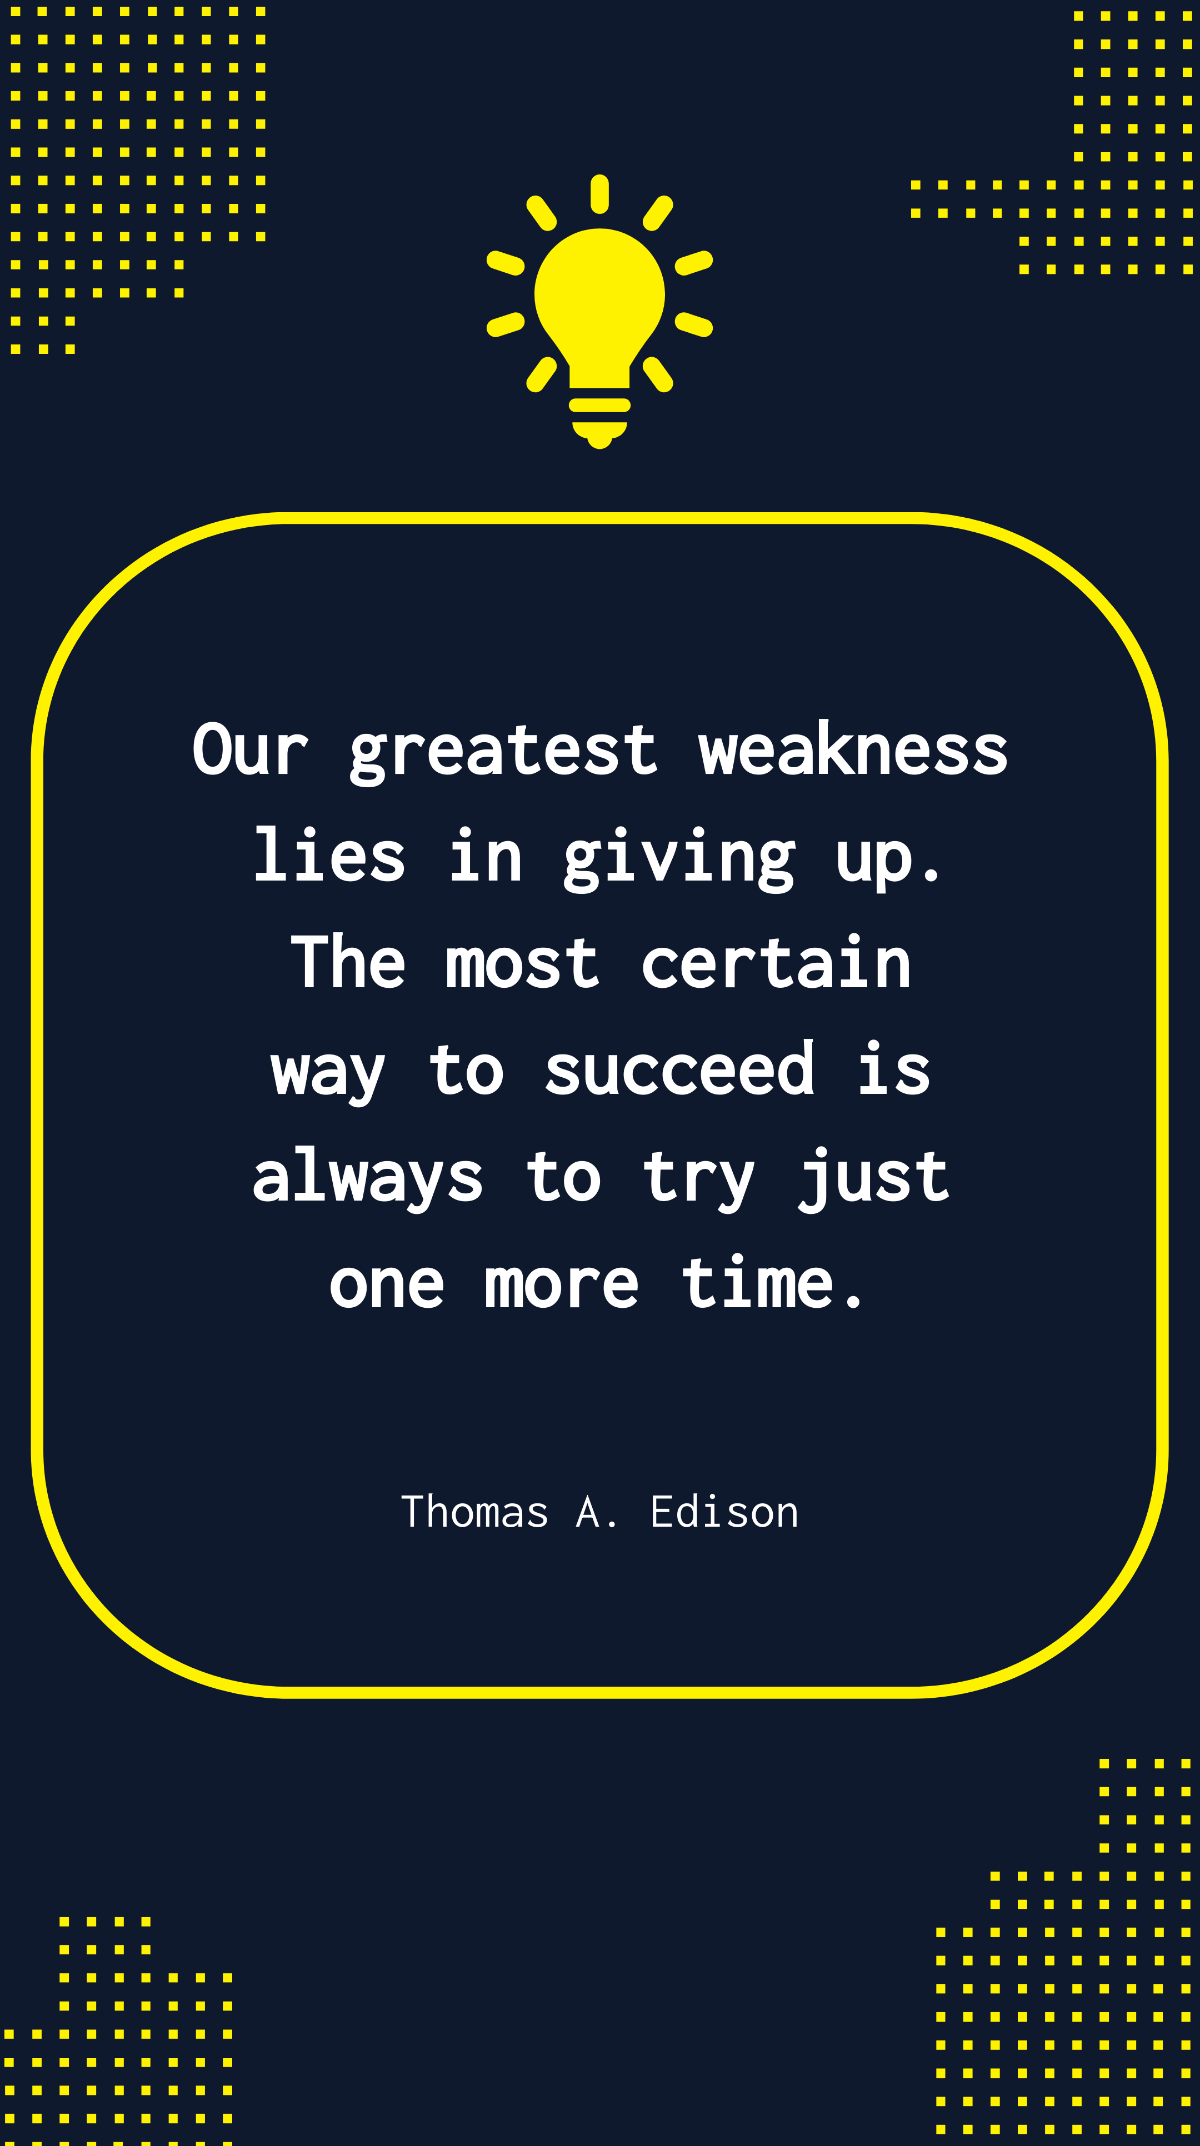 Thomas A. Edison - Our greatest weakness lies in giving up. The most certain way to succeed is always to try just one more time.